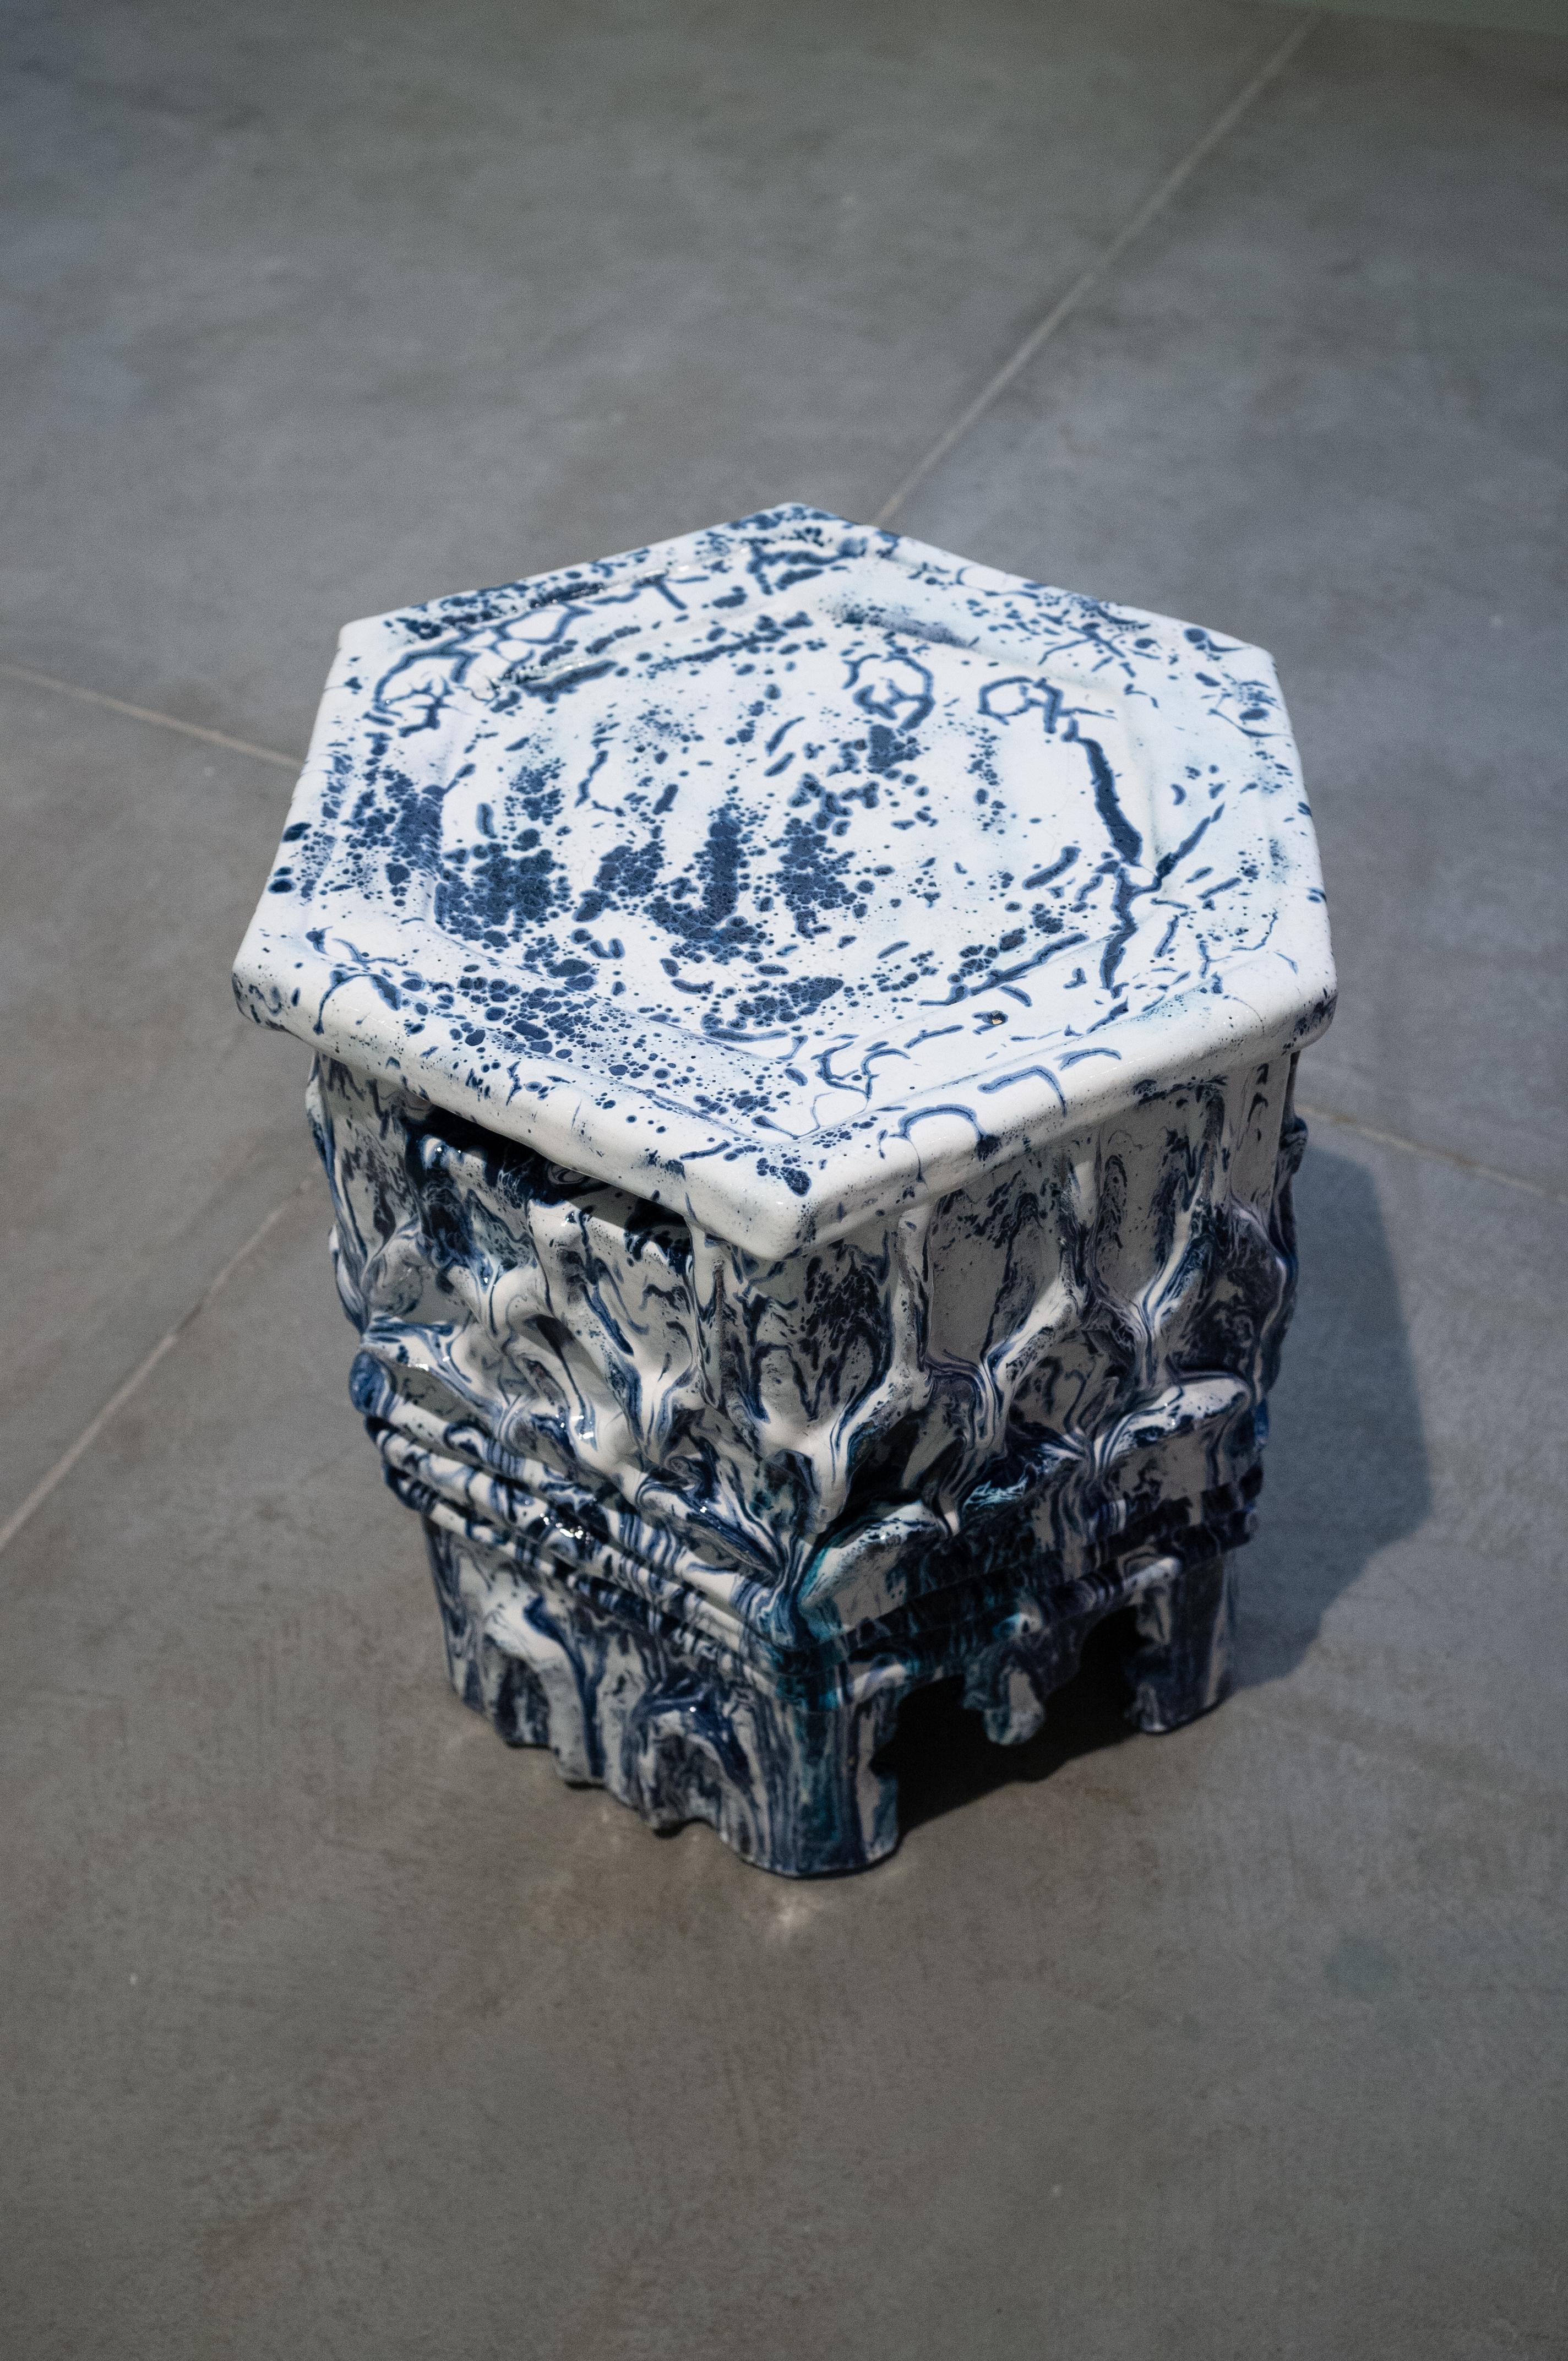 Antartigo table by Bela Silva 
Dimensions: 45 x 38 x 43,5 cm
Material: Stoneware
Color and Finish: Blue cobalt and white glaze 

Bela Silva was born in Lisbon, Portugal, and studied at:

Porto and the Lisbon Fine Arts Schools in